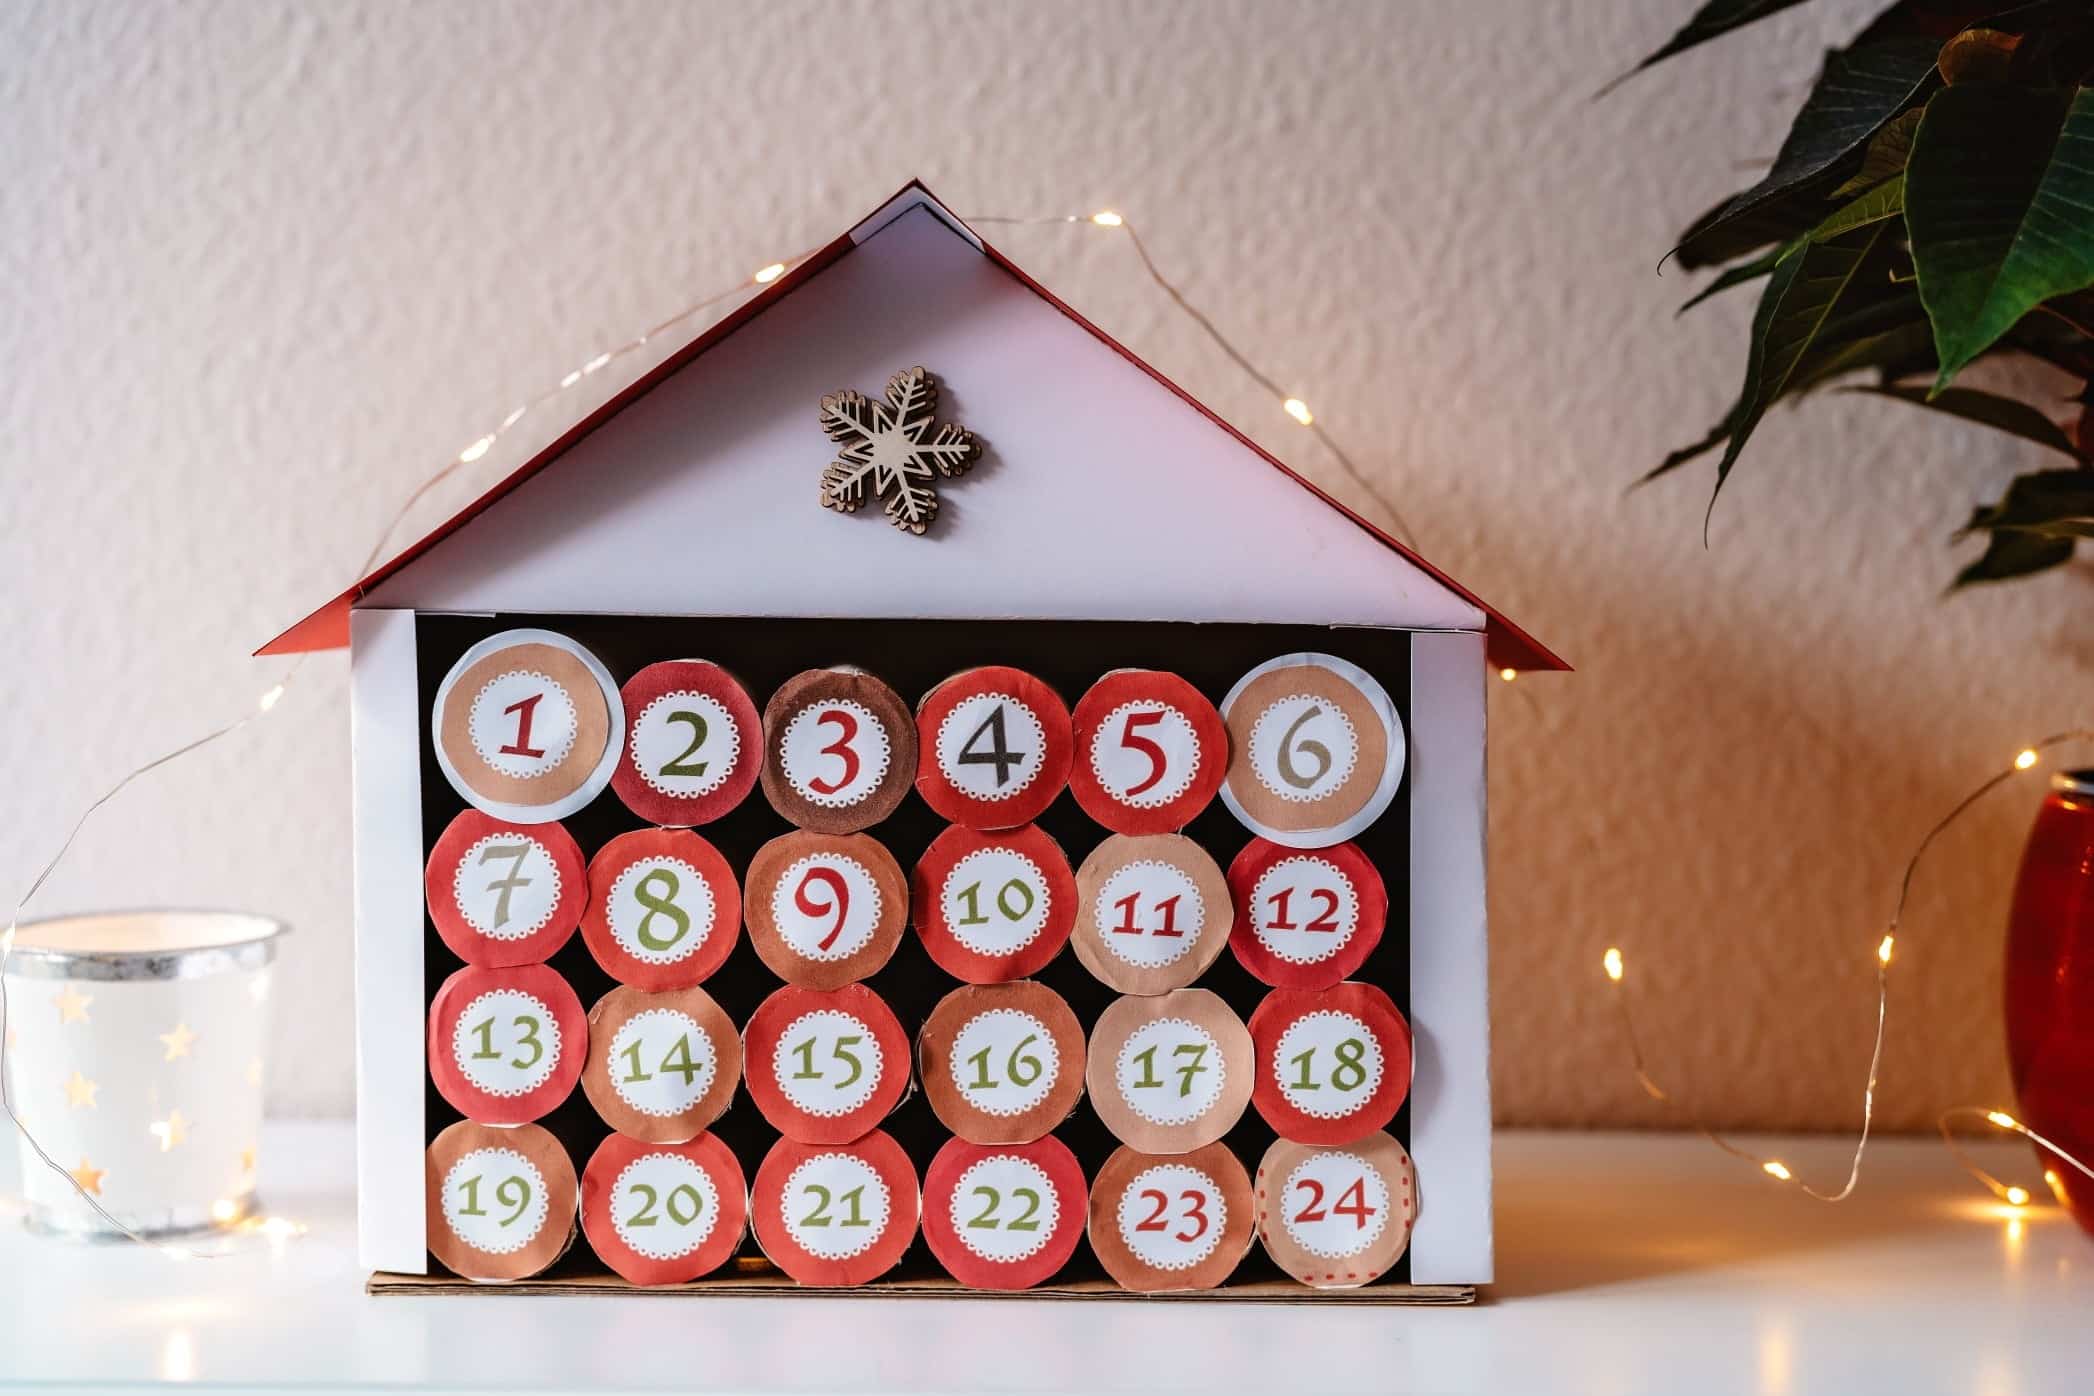 Christmas Countdown Ideas featured image of a homemade advent calendar house from toilet paper rolls